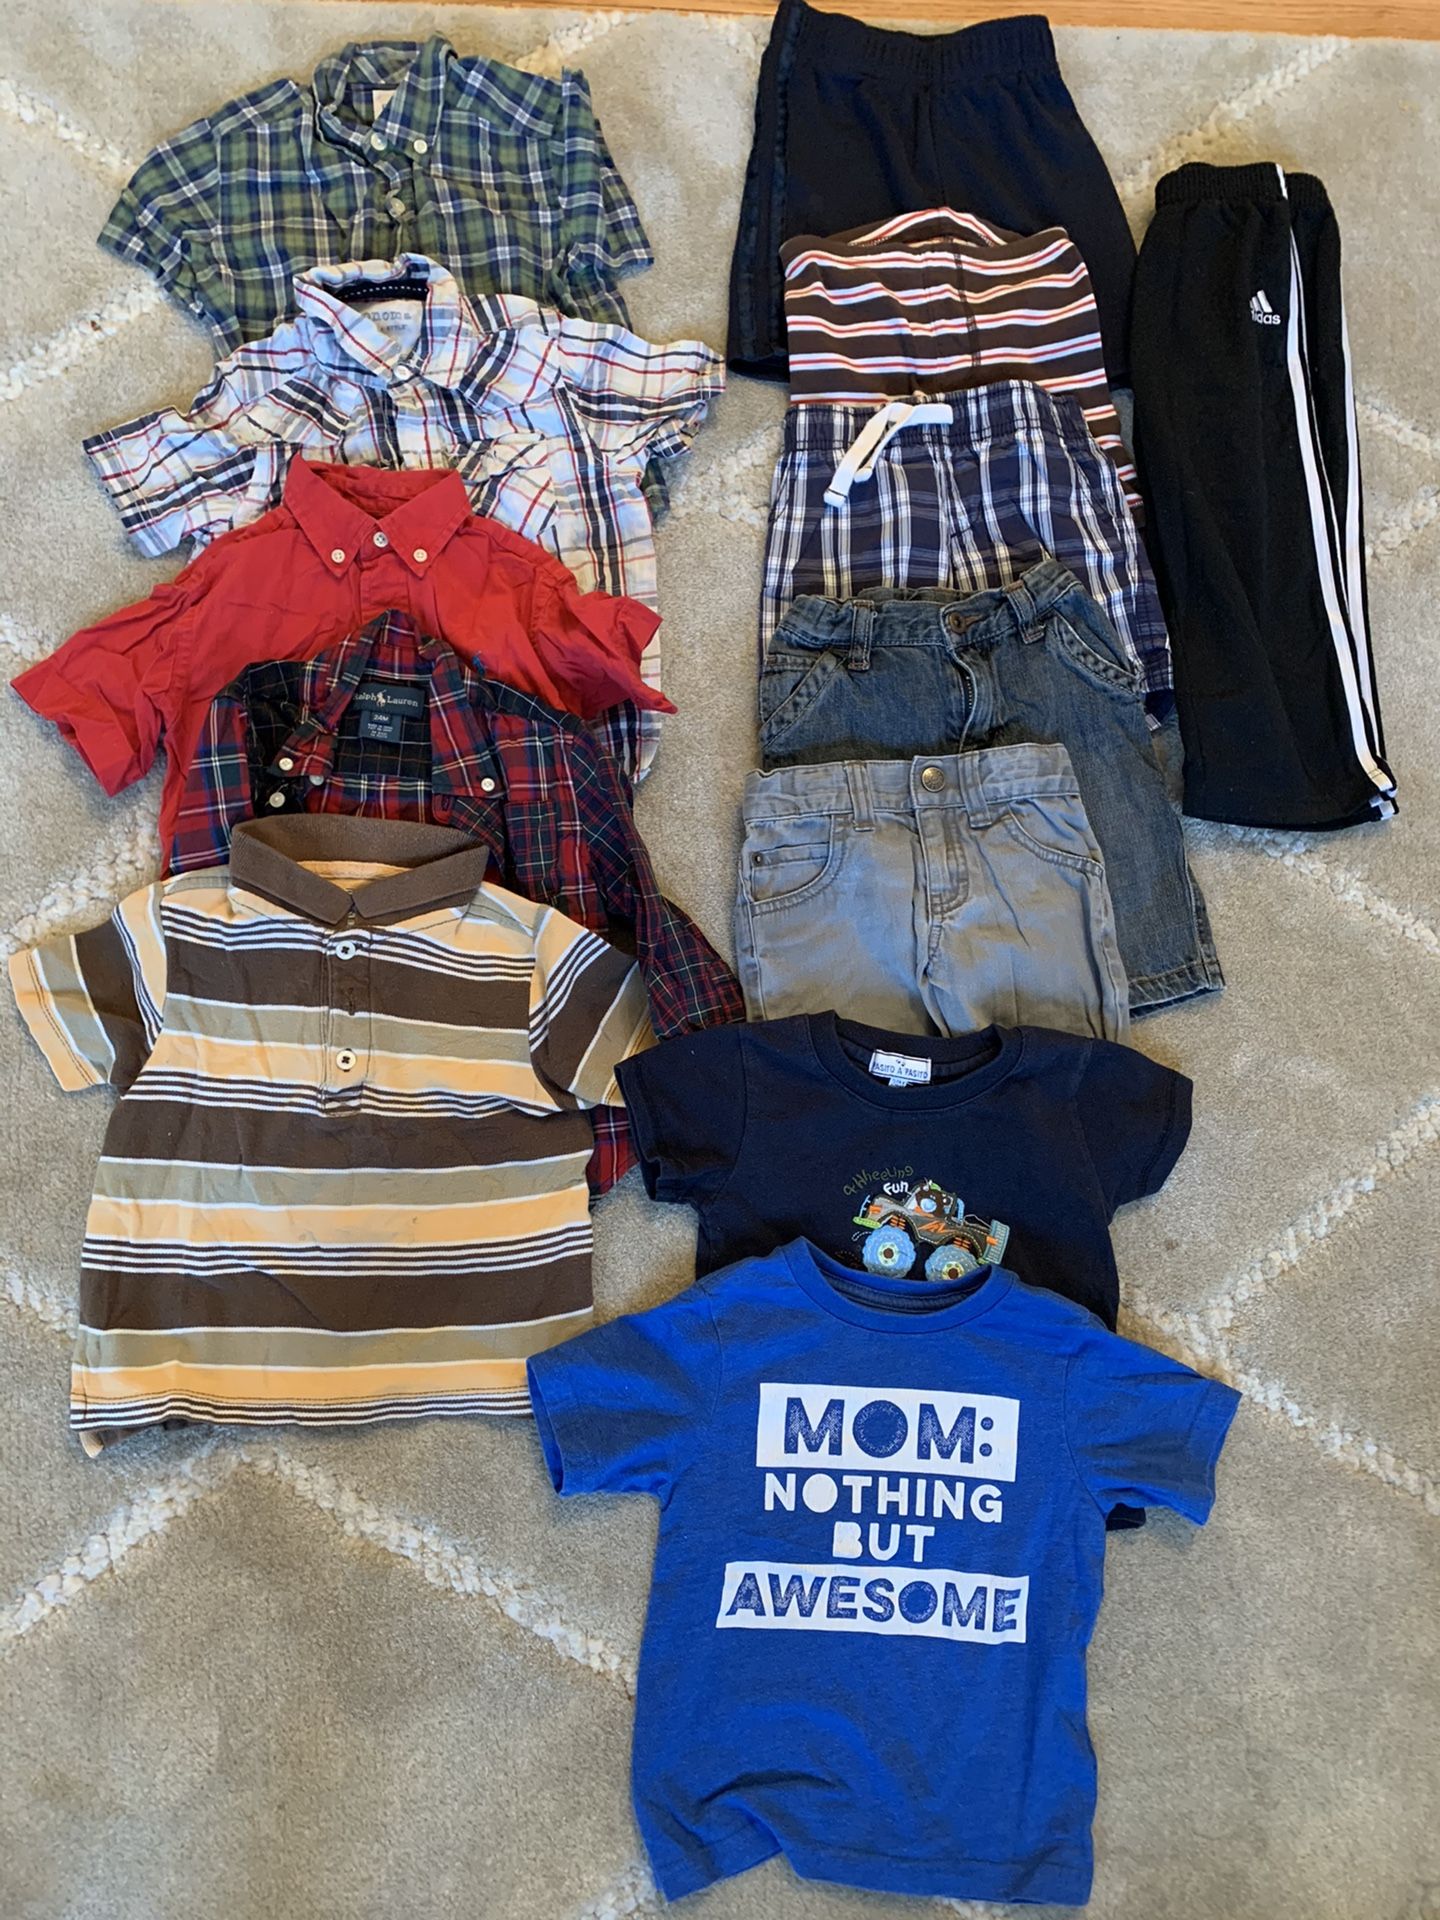 Clothes size 24 months or size 2 boy